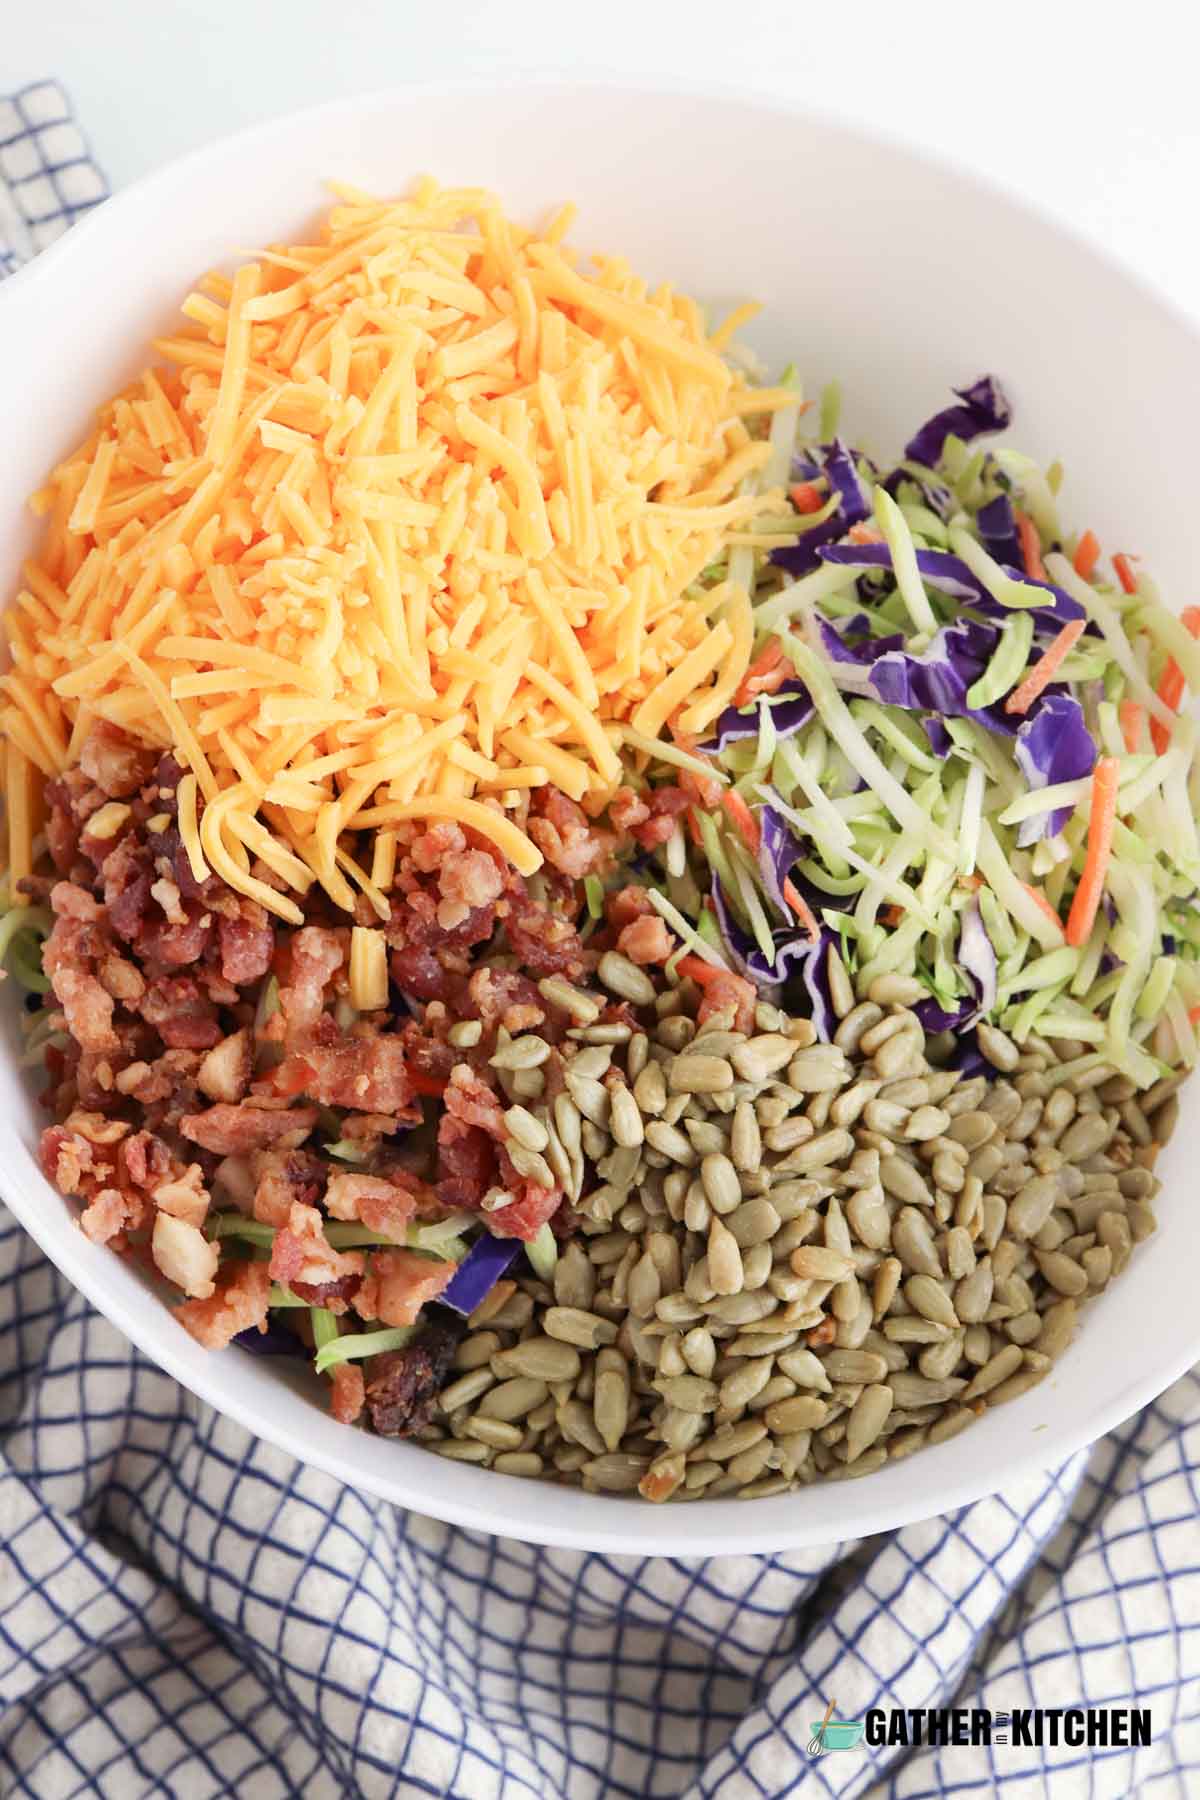 Ingredients for broccoli slaw in a bowl: shredded cheese, broccoli slaw, sunflower kernels, and crumbled bacon.